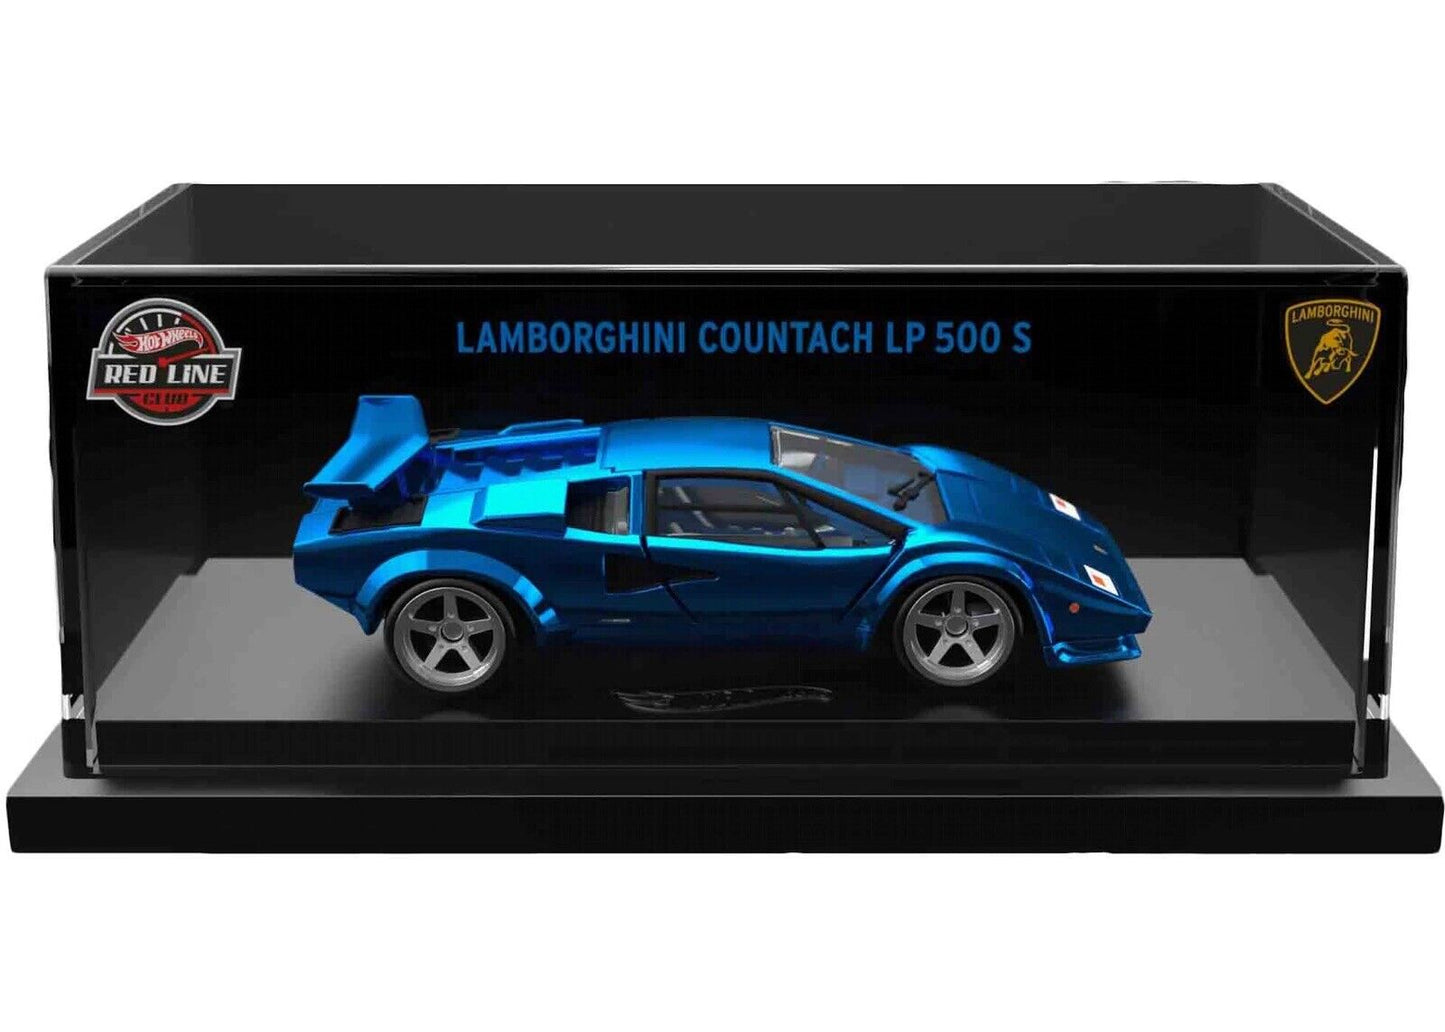 Hot Wheels 2022 - RLC Exclusive / sELECTIONs - ’82 Lamborghini Countach LP500 S - Spectraflame Blue - Metal/Metal & Real Riders - Boxed with Acrylic Display Case